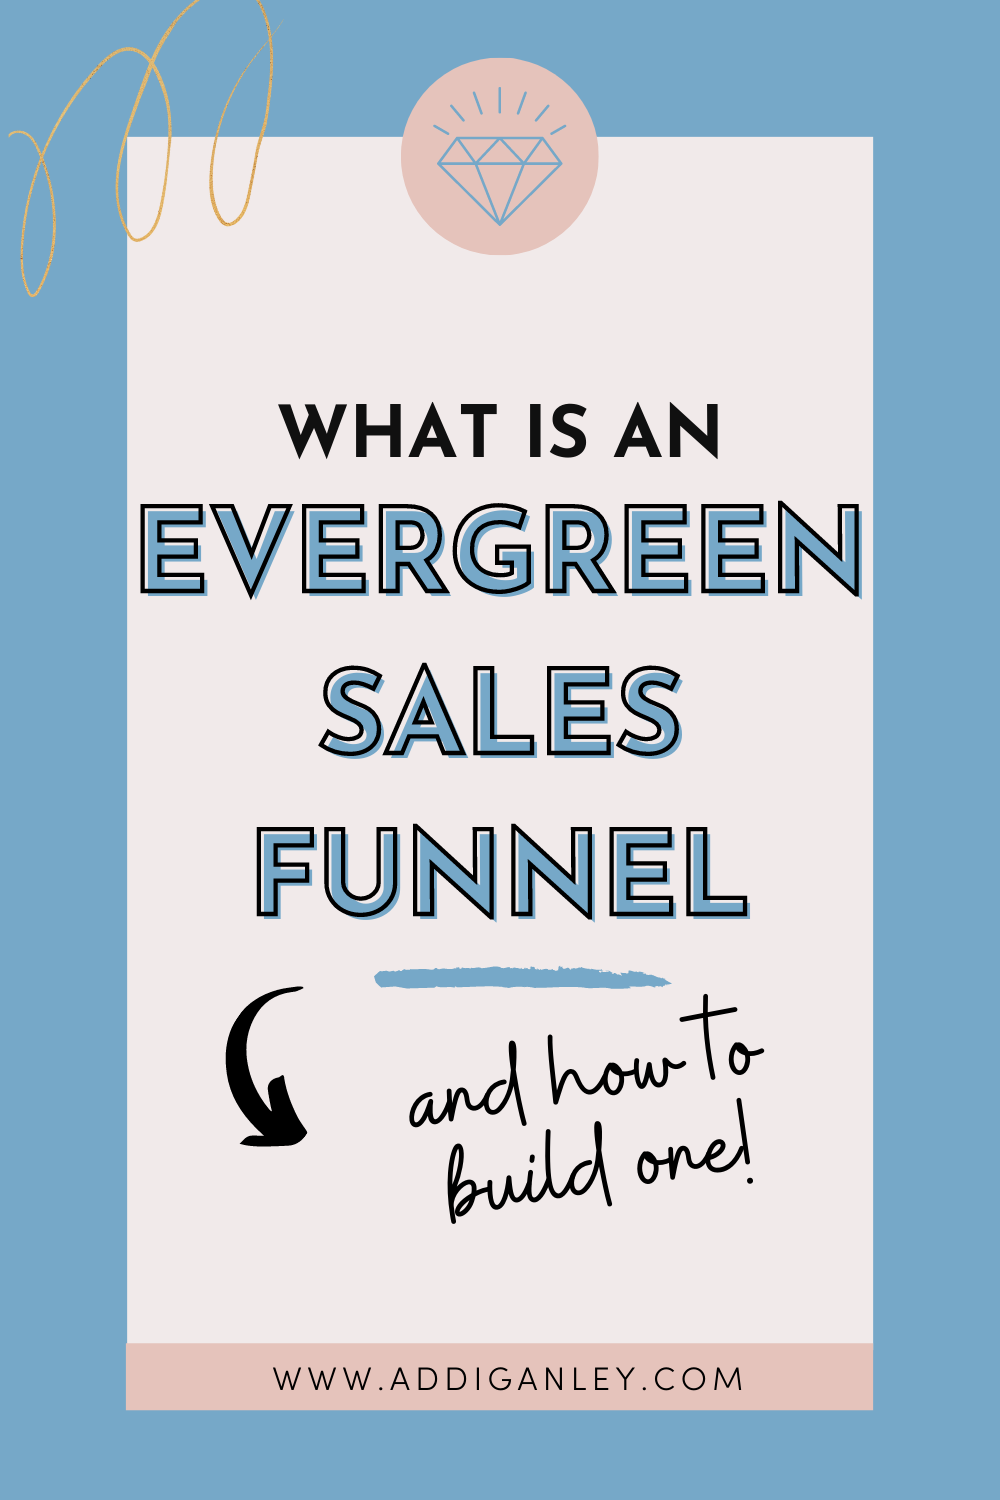 What+Is+an+Evergreen+Sales+Funnel+%28and+How+to+Build+One%29+%281%29